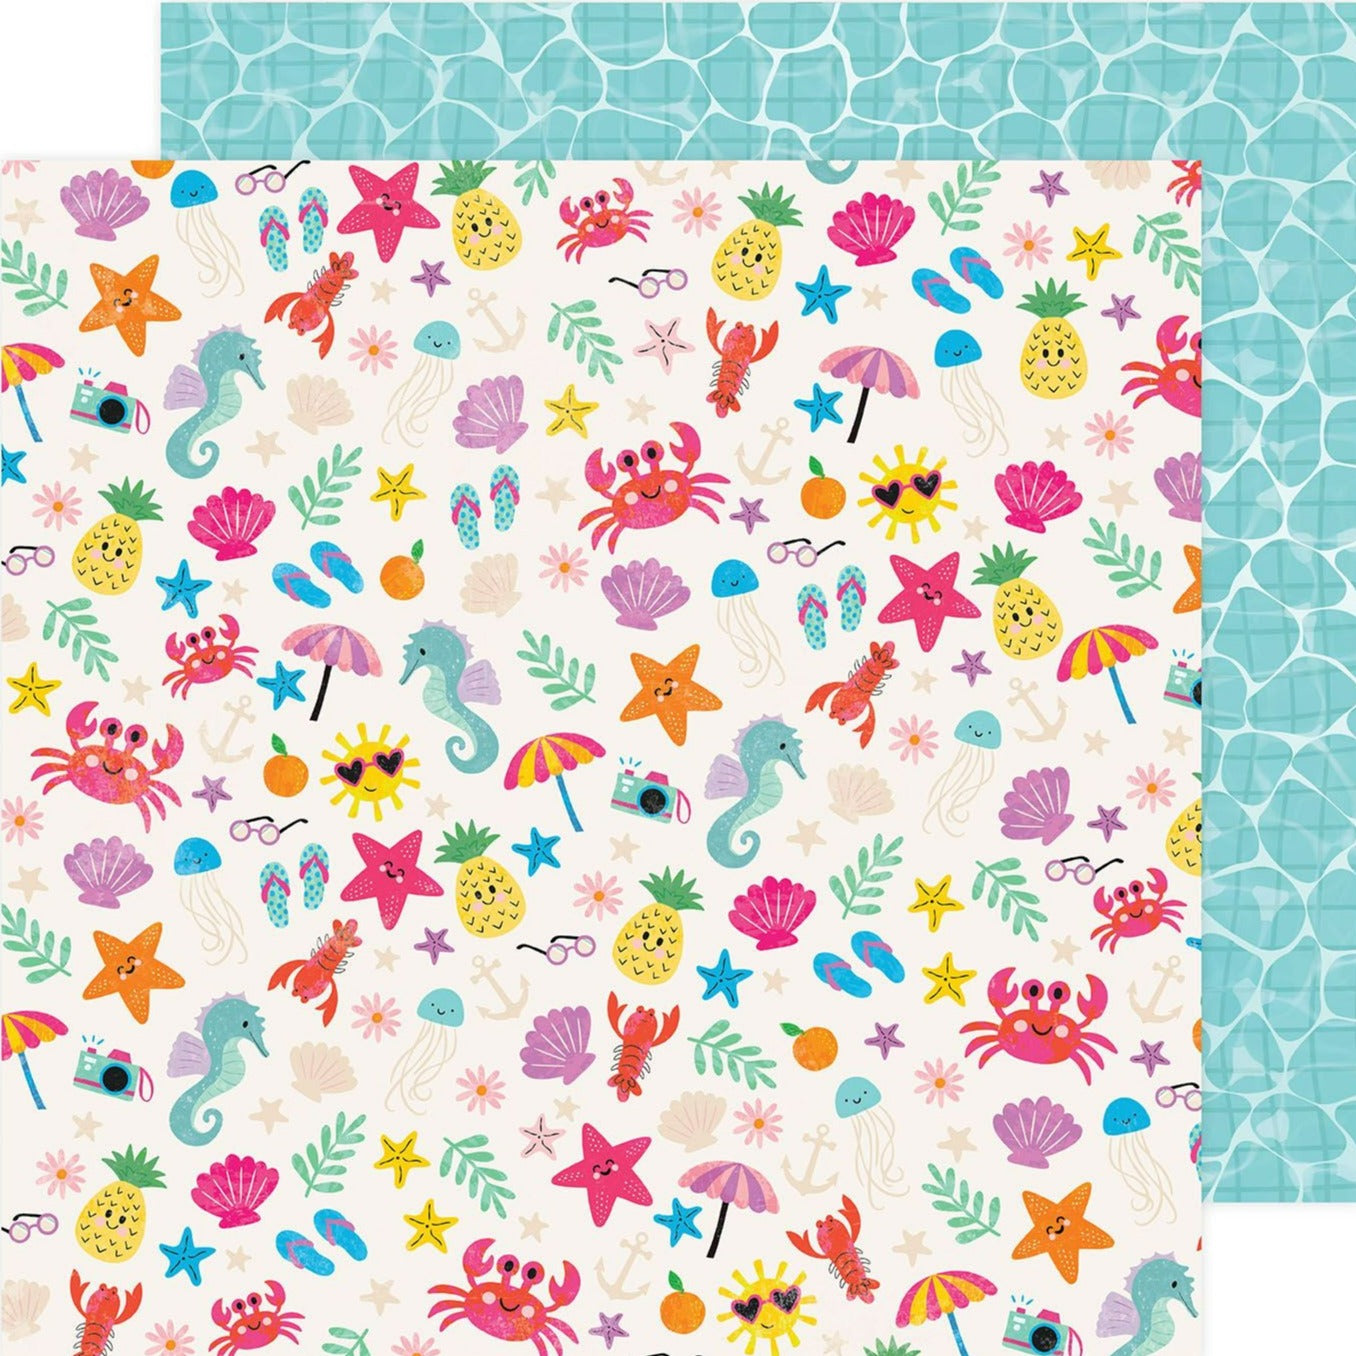 (fun, vibrant beach icons, including starfish, pineapples, crabs, and more on a white background - light blue pool tile with water background reverse)